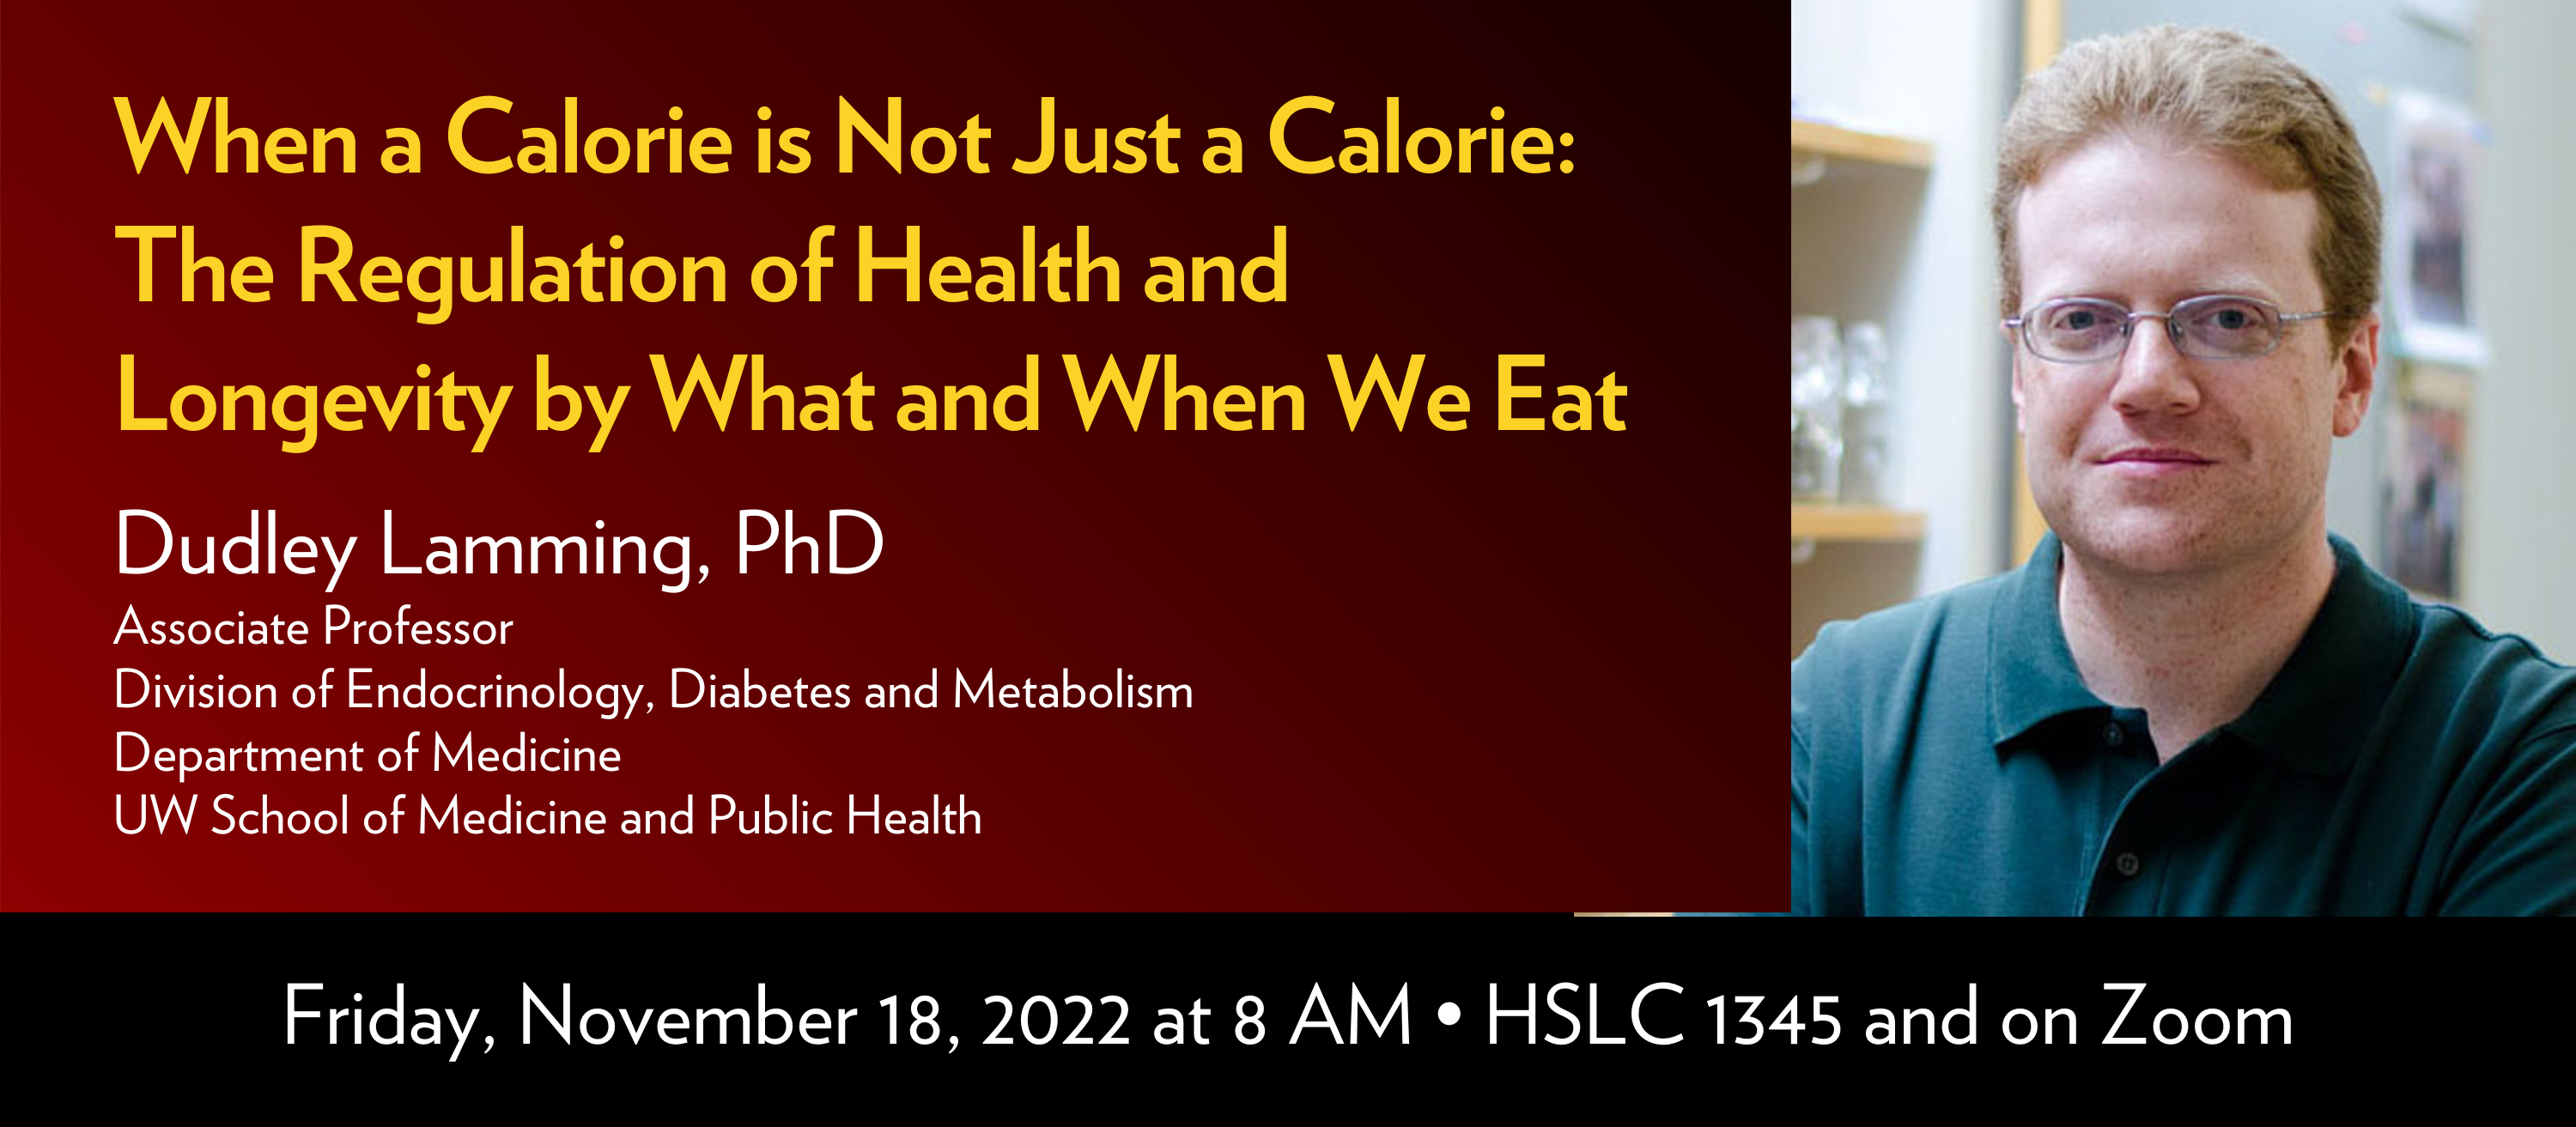 Title: When a Calorie is Not Just a Calorie: the Regulation of Health and Longevity by What and When We Eat